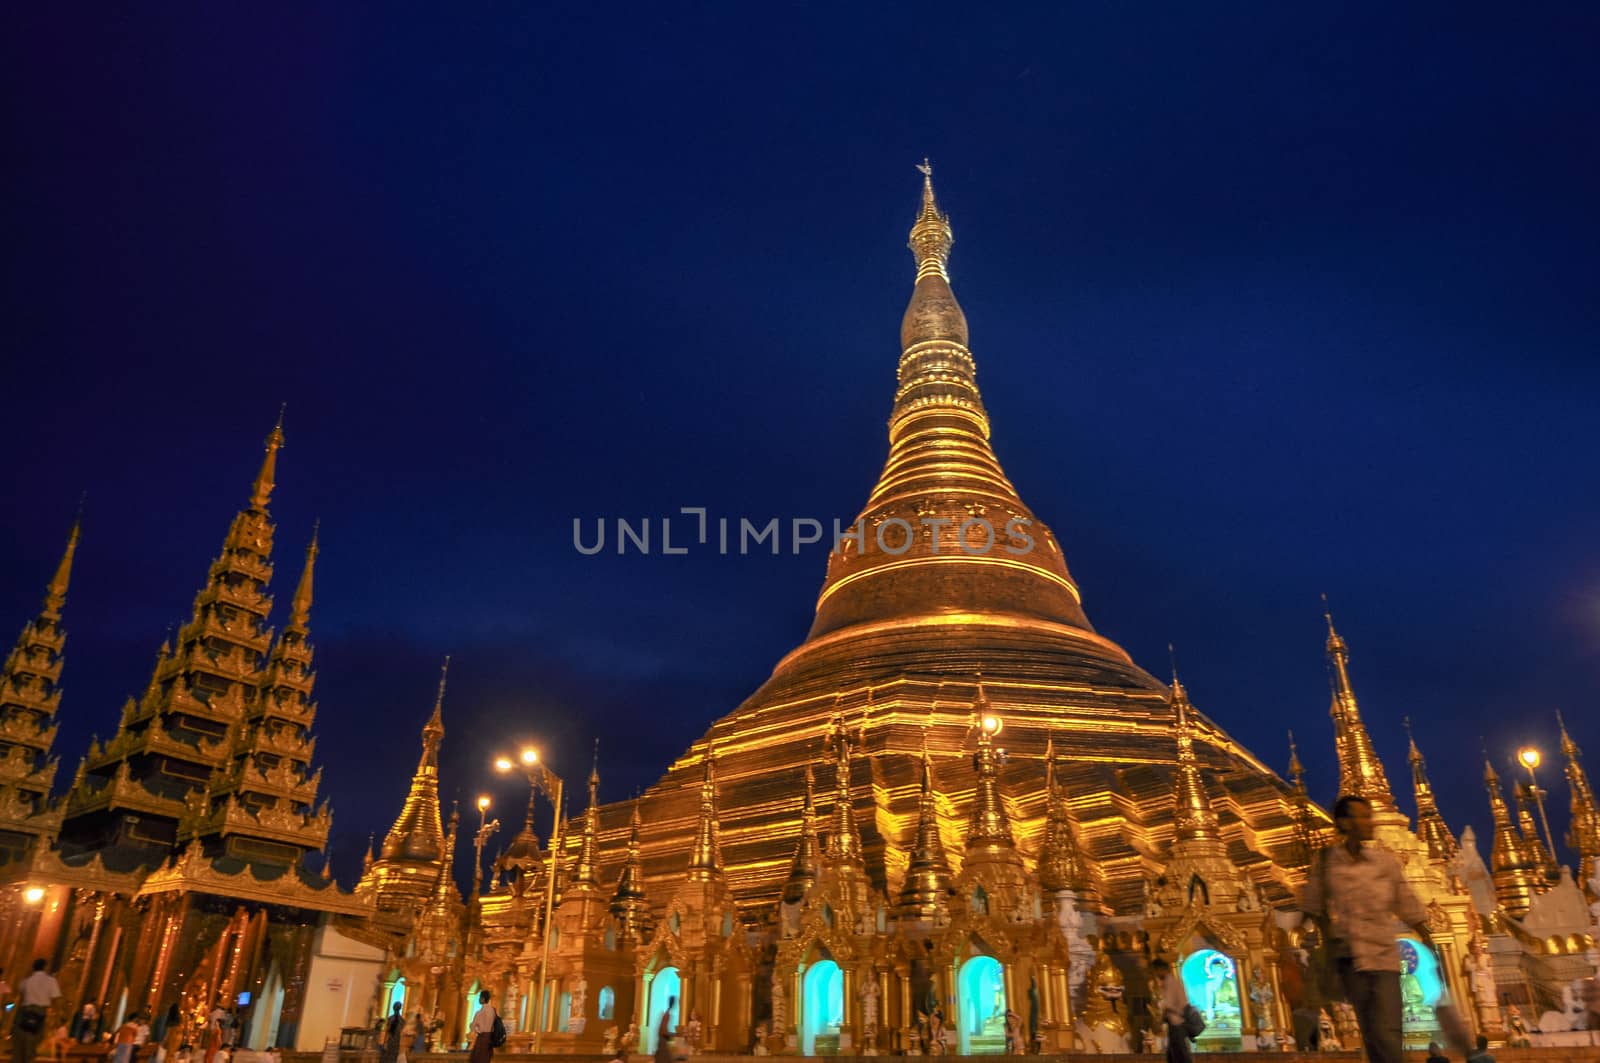 Shwedagon Pagoda in Yangon City, Burma with Beautiful Night Light: the beautiful golden pagoda, the oldest historical pagoda in Burma and the world, in the evening with great evening light.